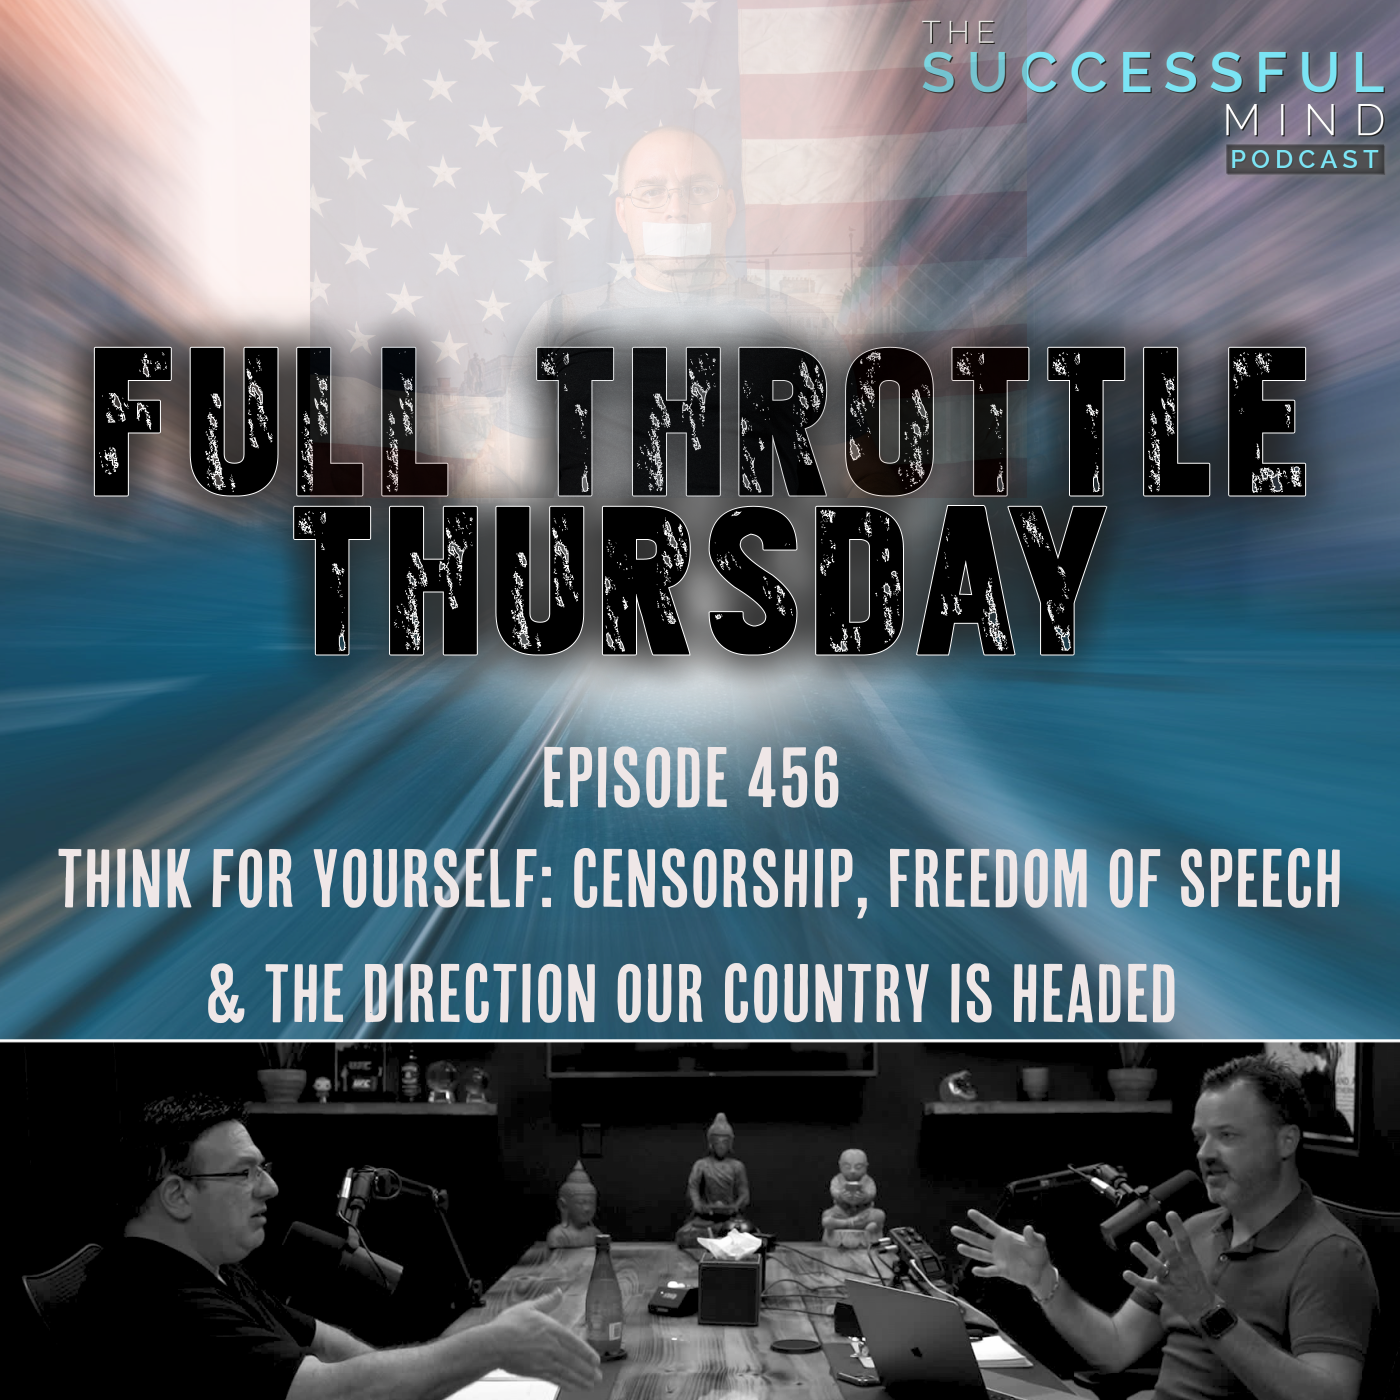 The Successful Mind Podcast - Full Throttle Thursday - Think For Yourself: Censorship, Freedom of Speech, and the Direction Our Country is Headed